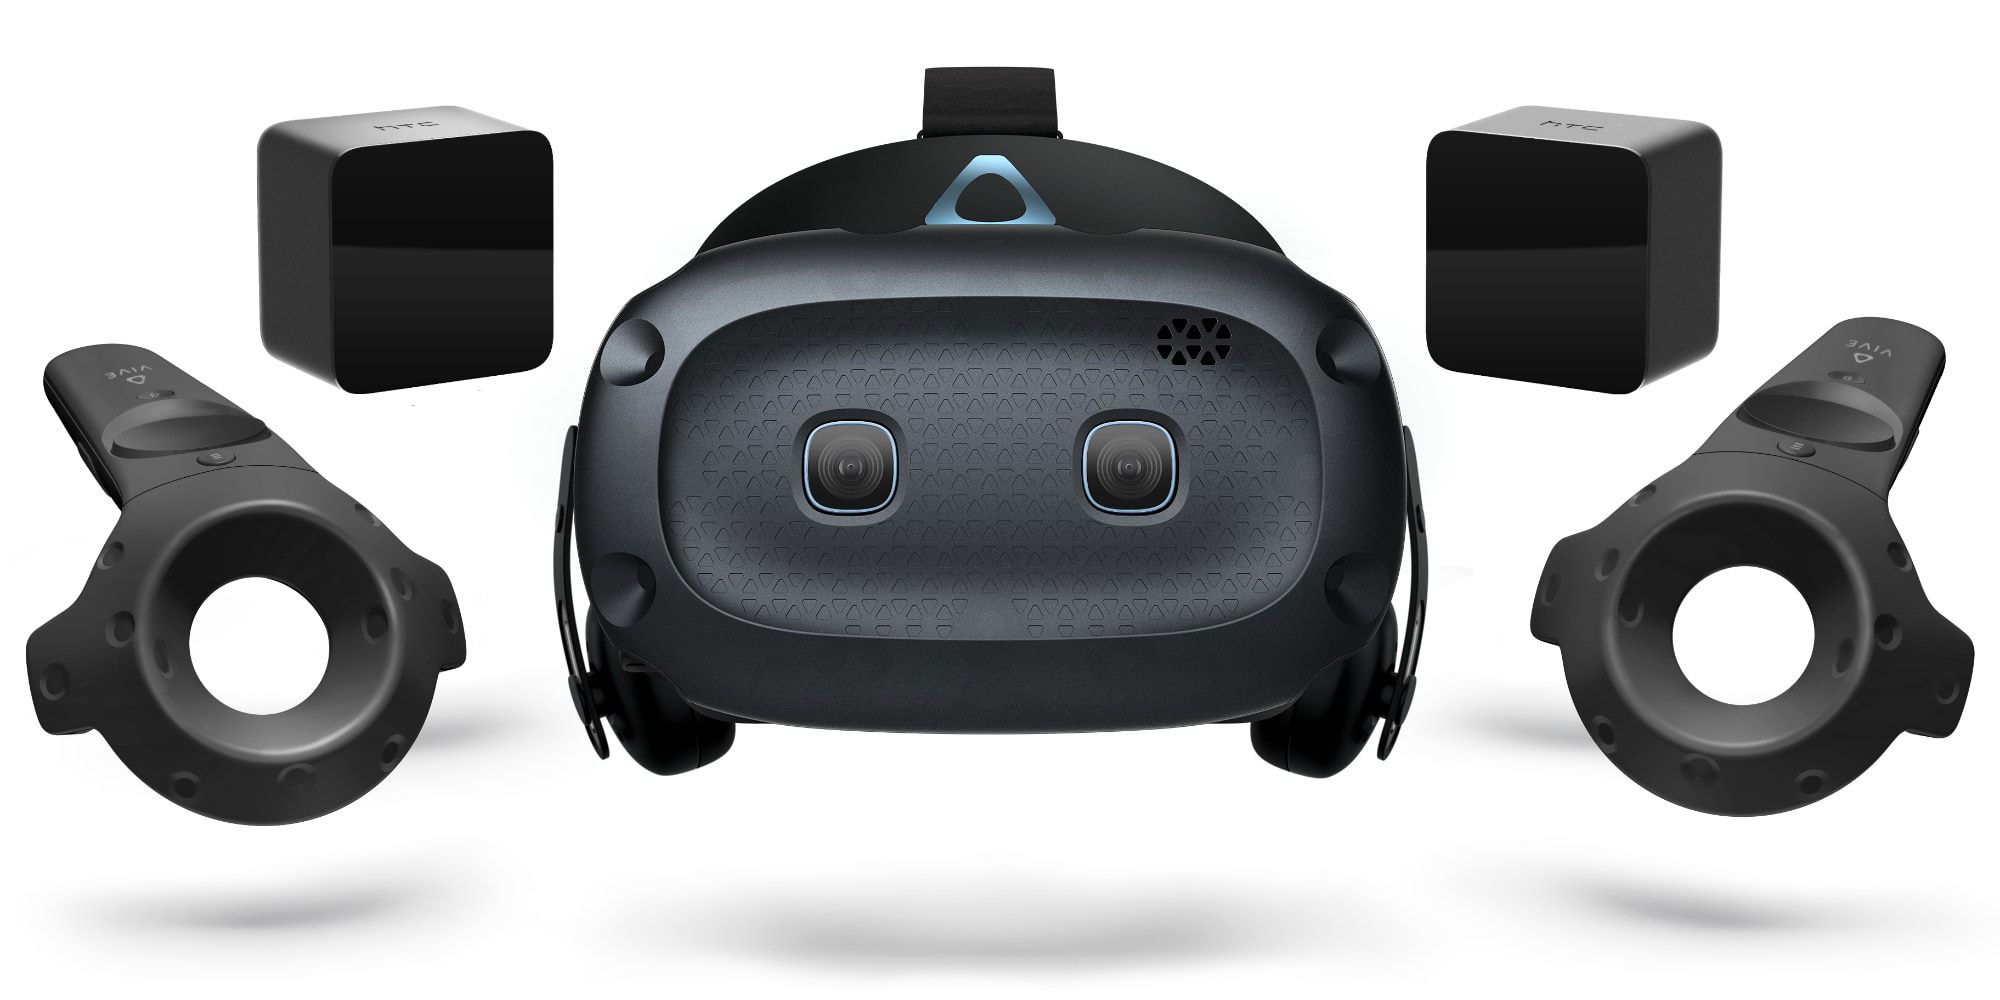 What are the full specifications for vive cosmos and vive cosmos elite?